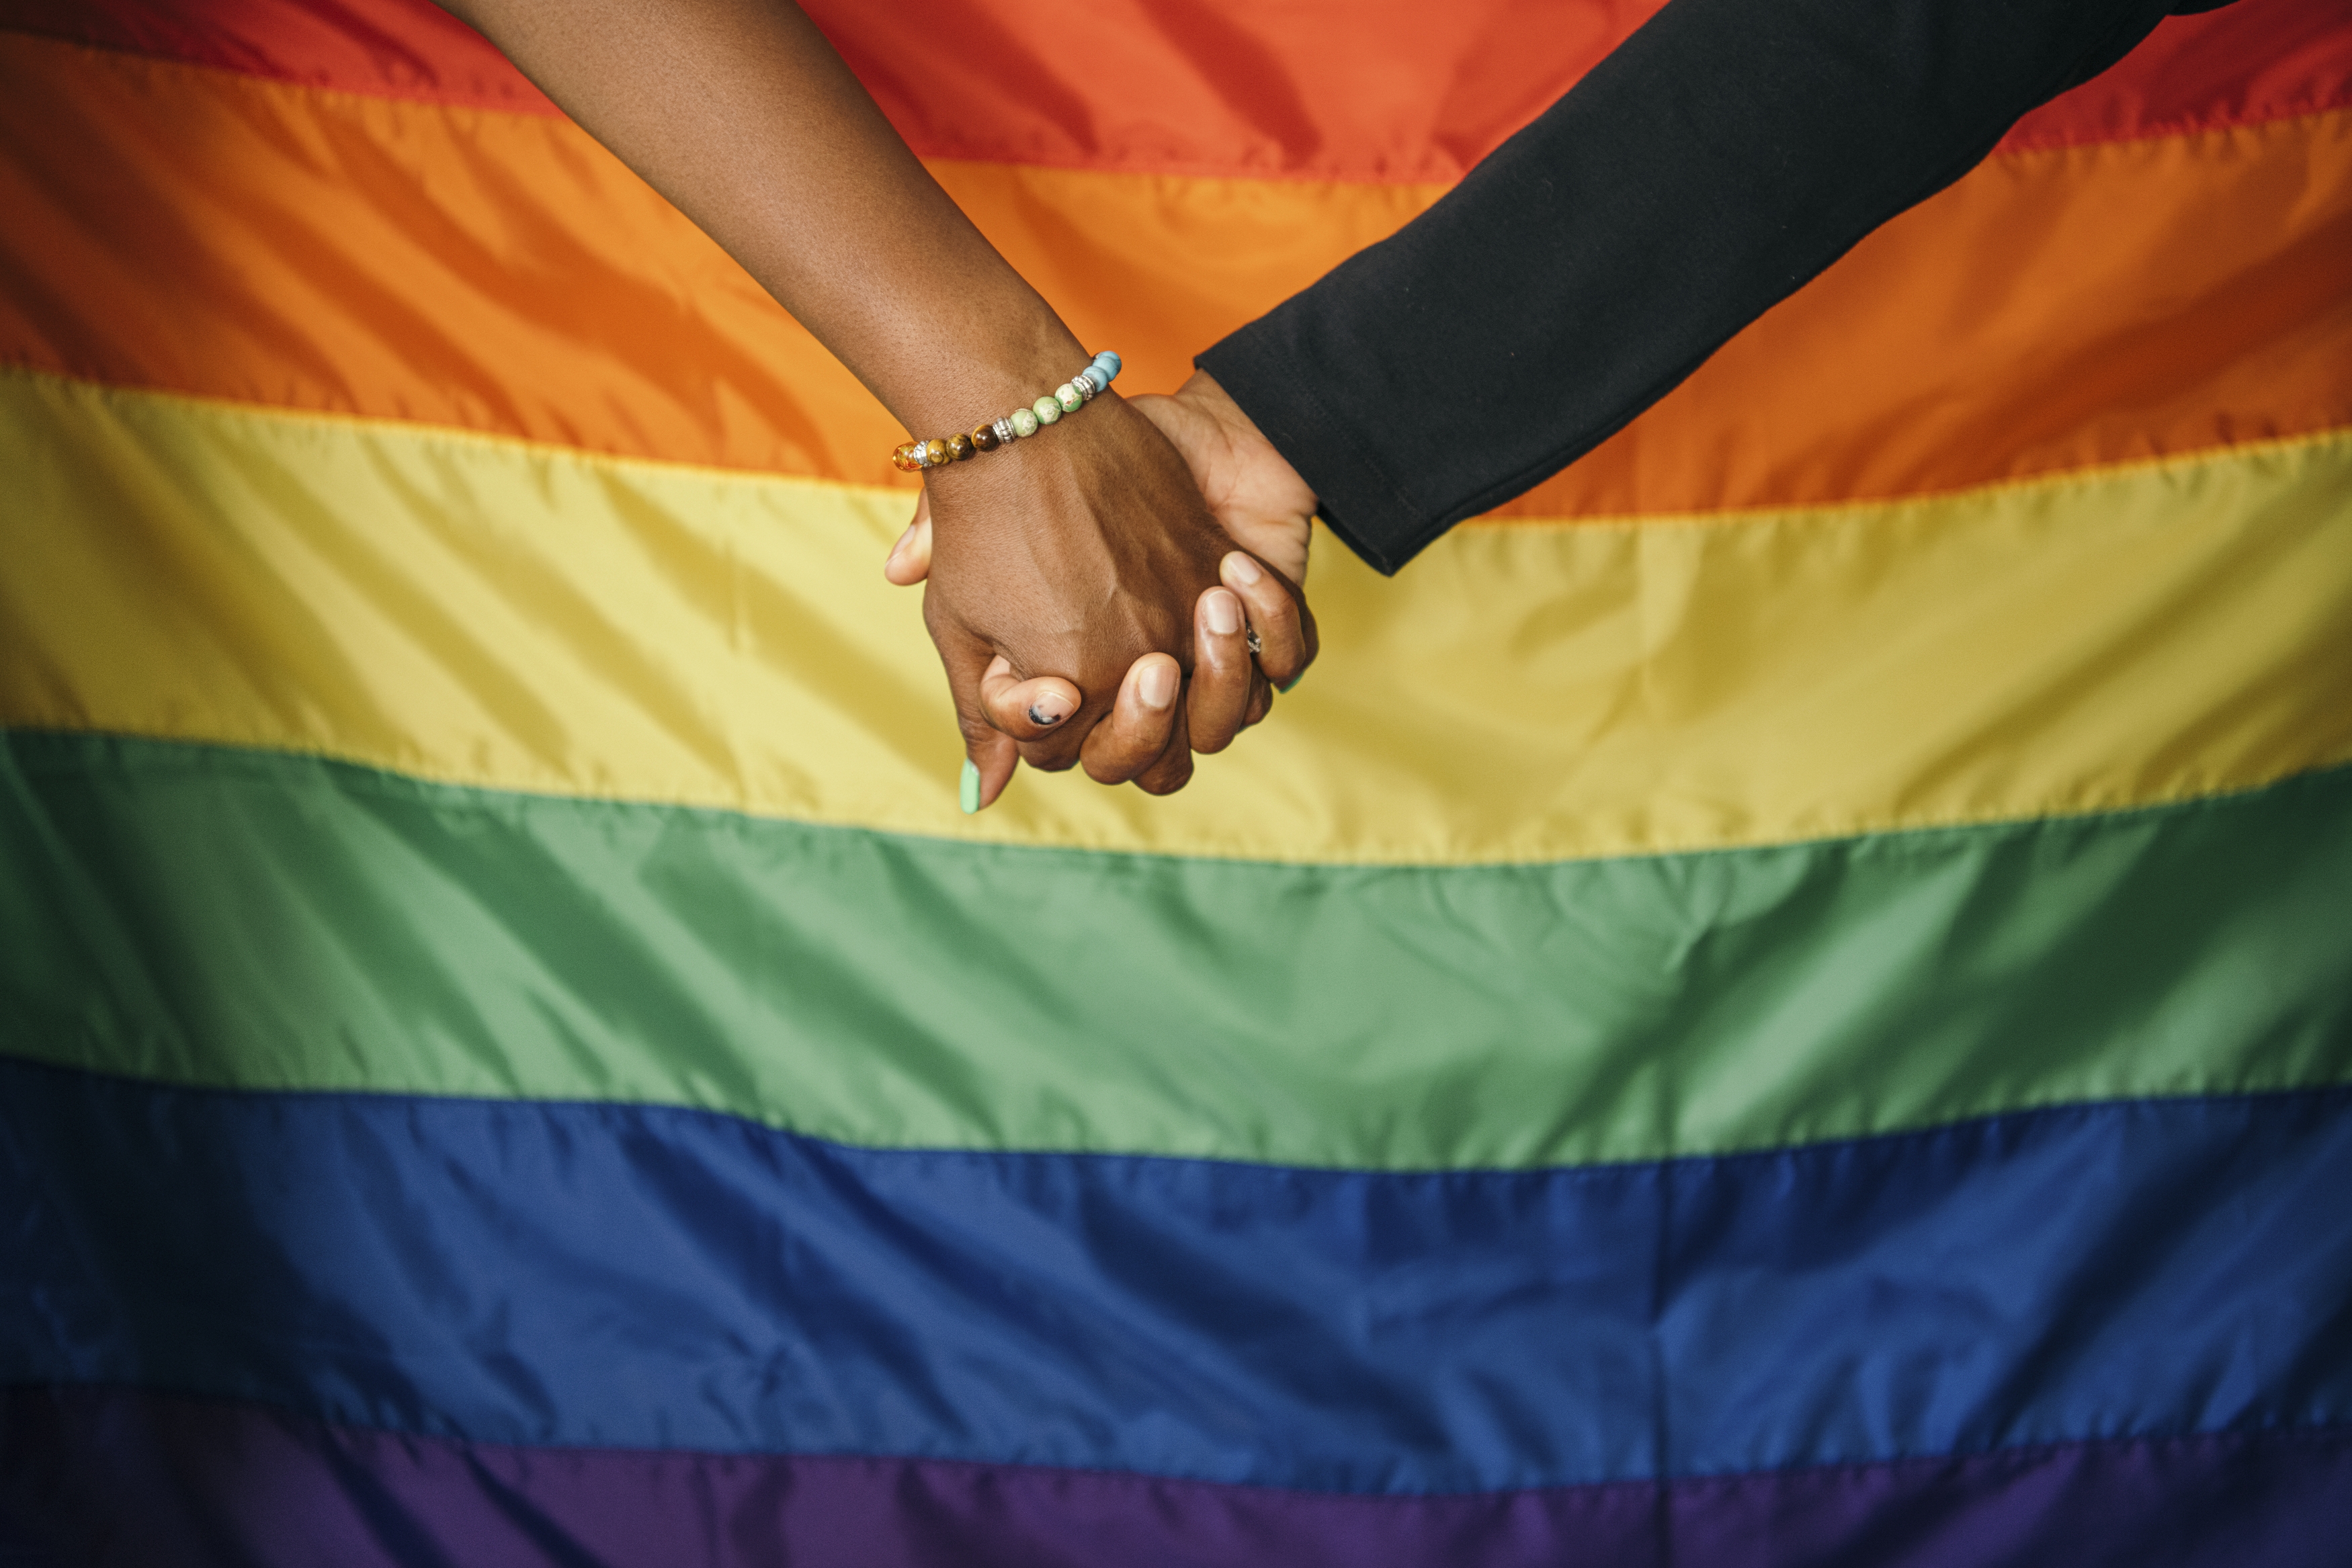 black hand and white hand holding hands in front of pride flag